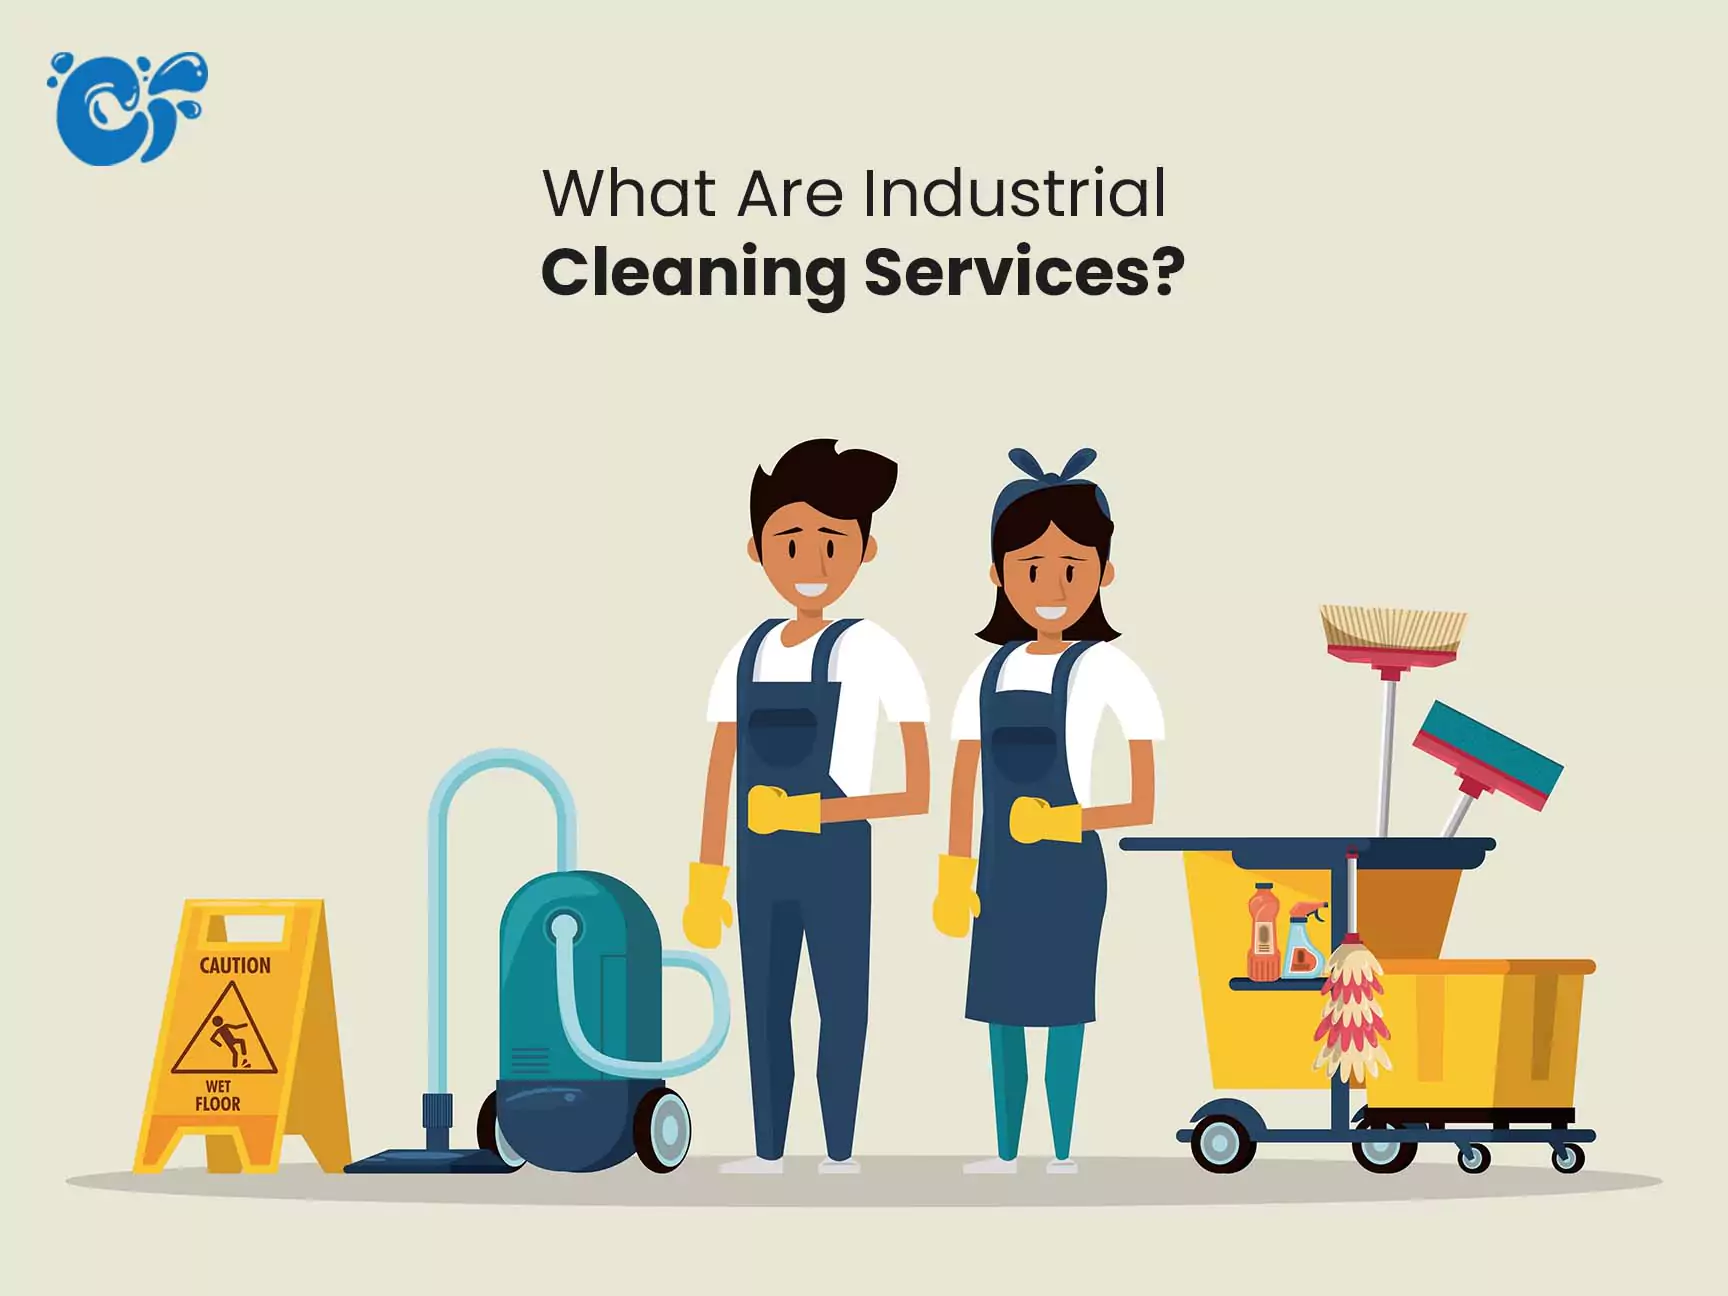 What Are Industrial Cleaning Services?